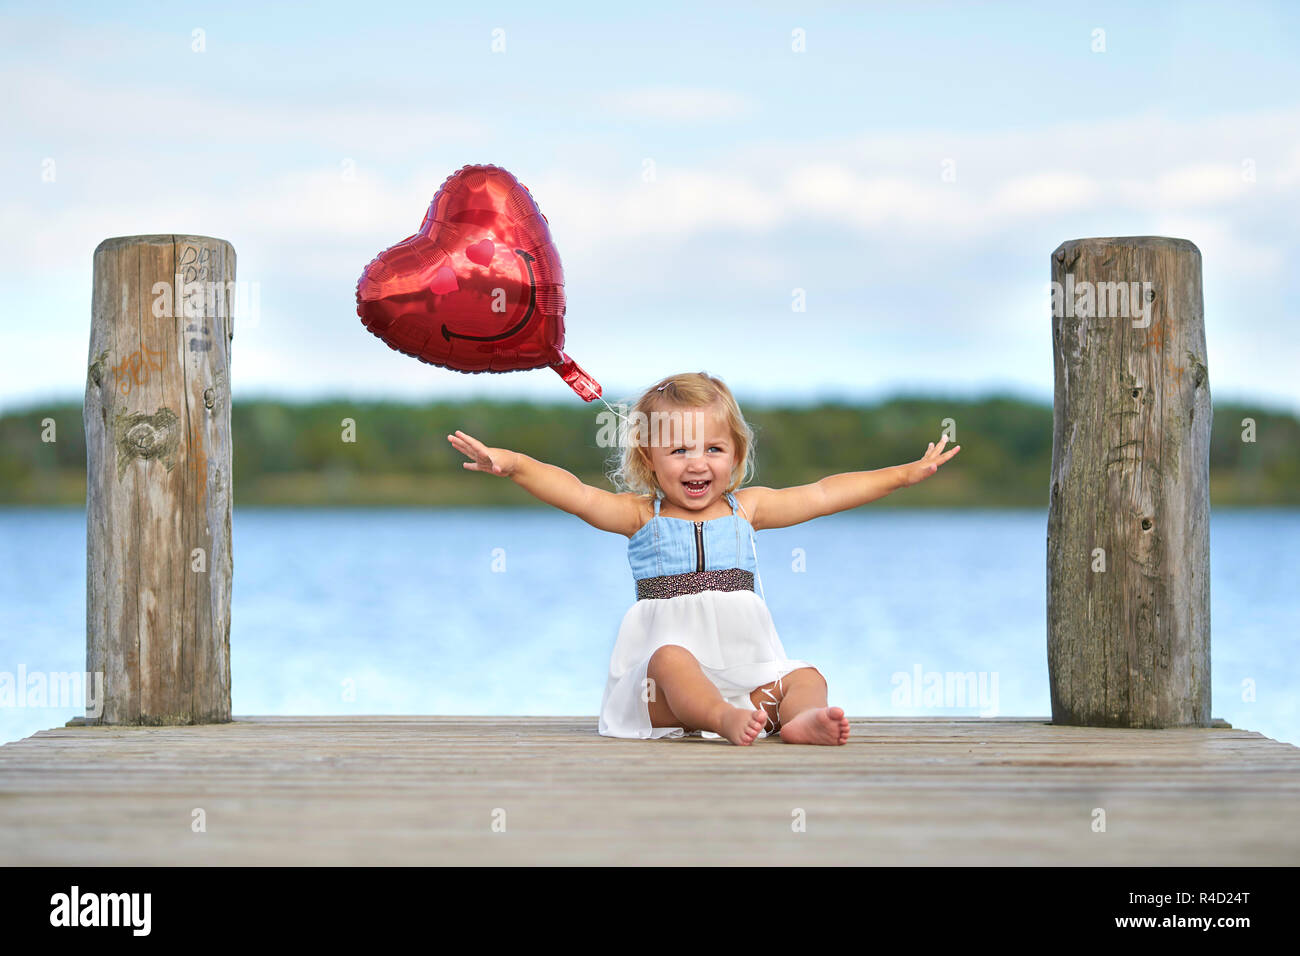 Â holidays on the lake,girls with heart balloons Stock Photo